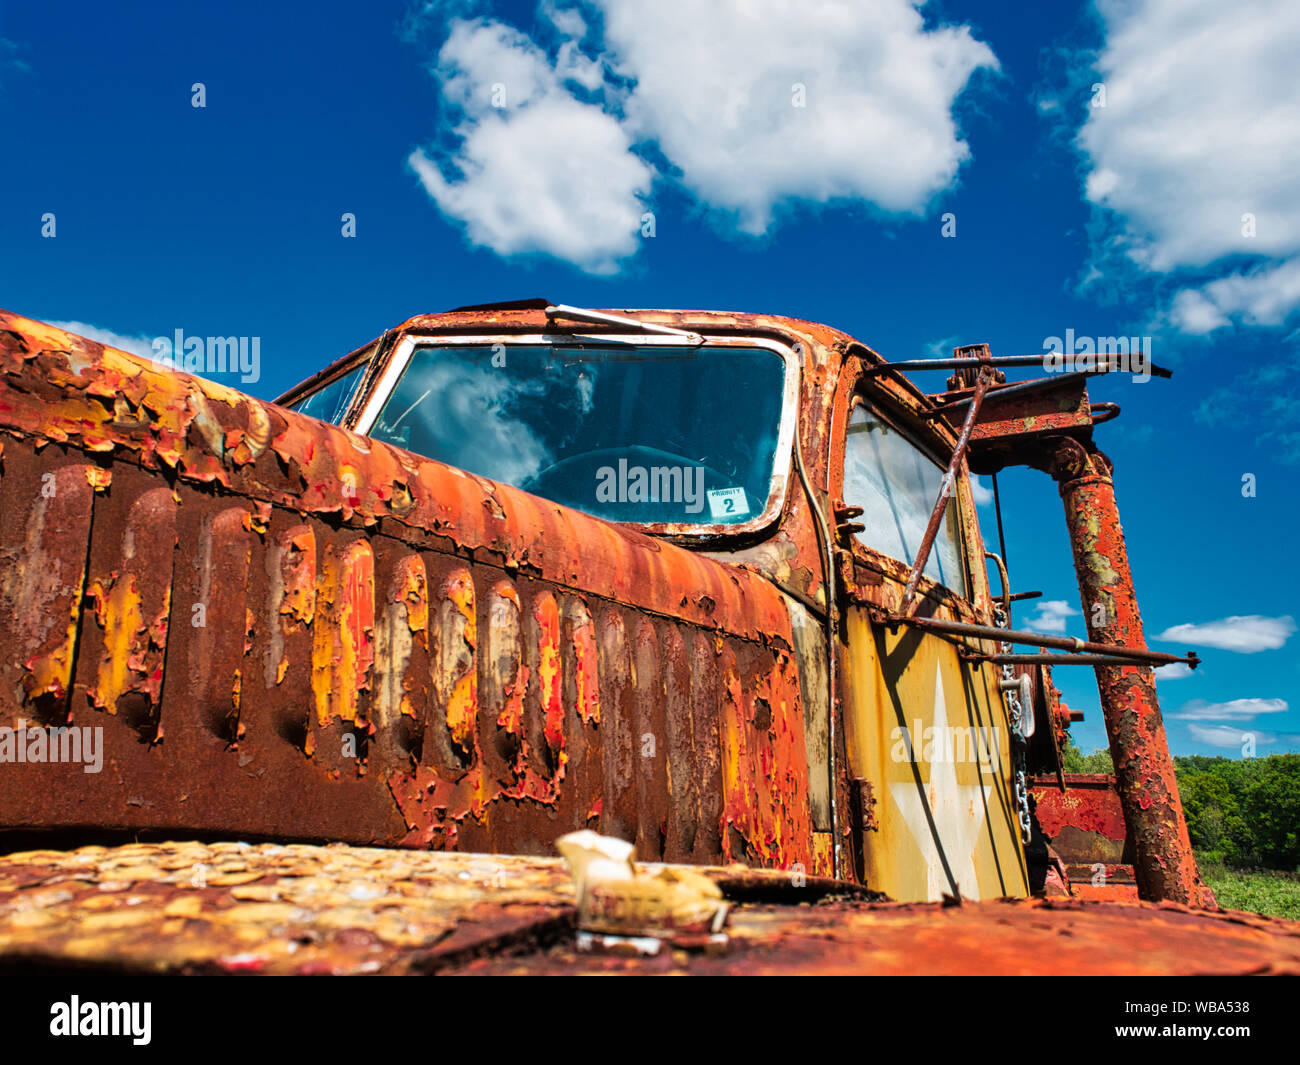 Rusty old military truck with sky in back ground Stock Photo